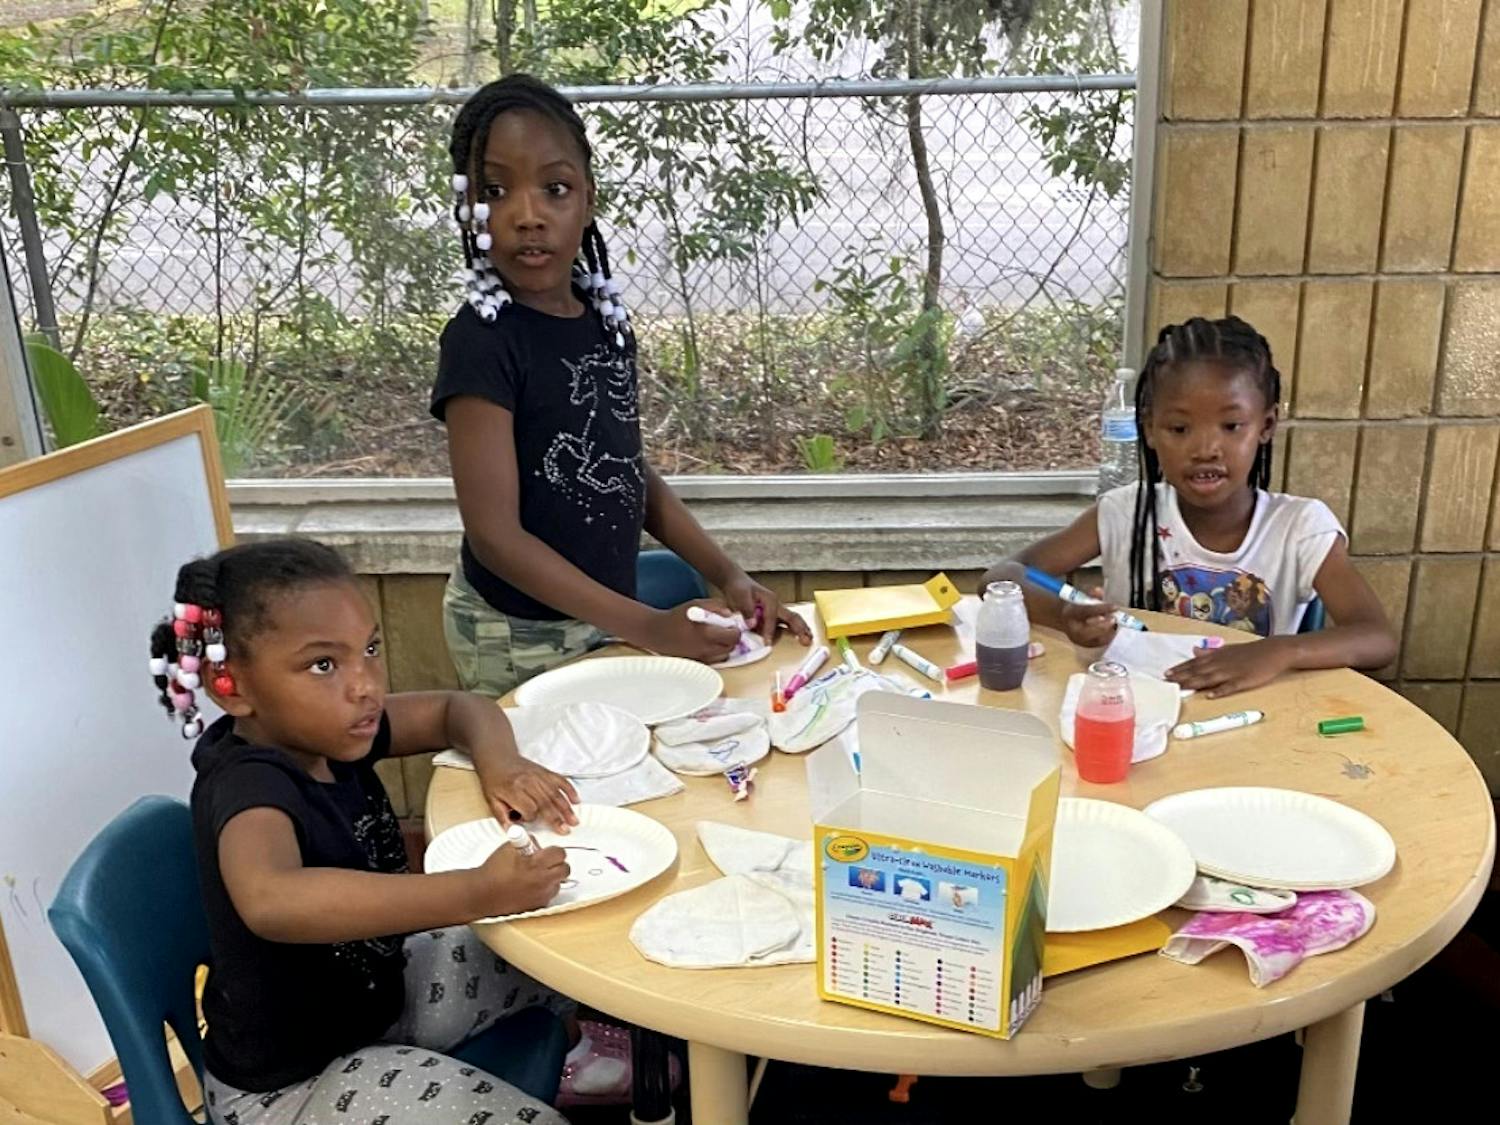 (From left to right): Sereniti Miller, Seyvyer Miller and Aariona Williams keep themselves busy with arts and crafts at Wash King on Tuesday, March 28, 2023.